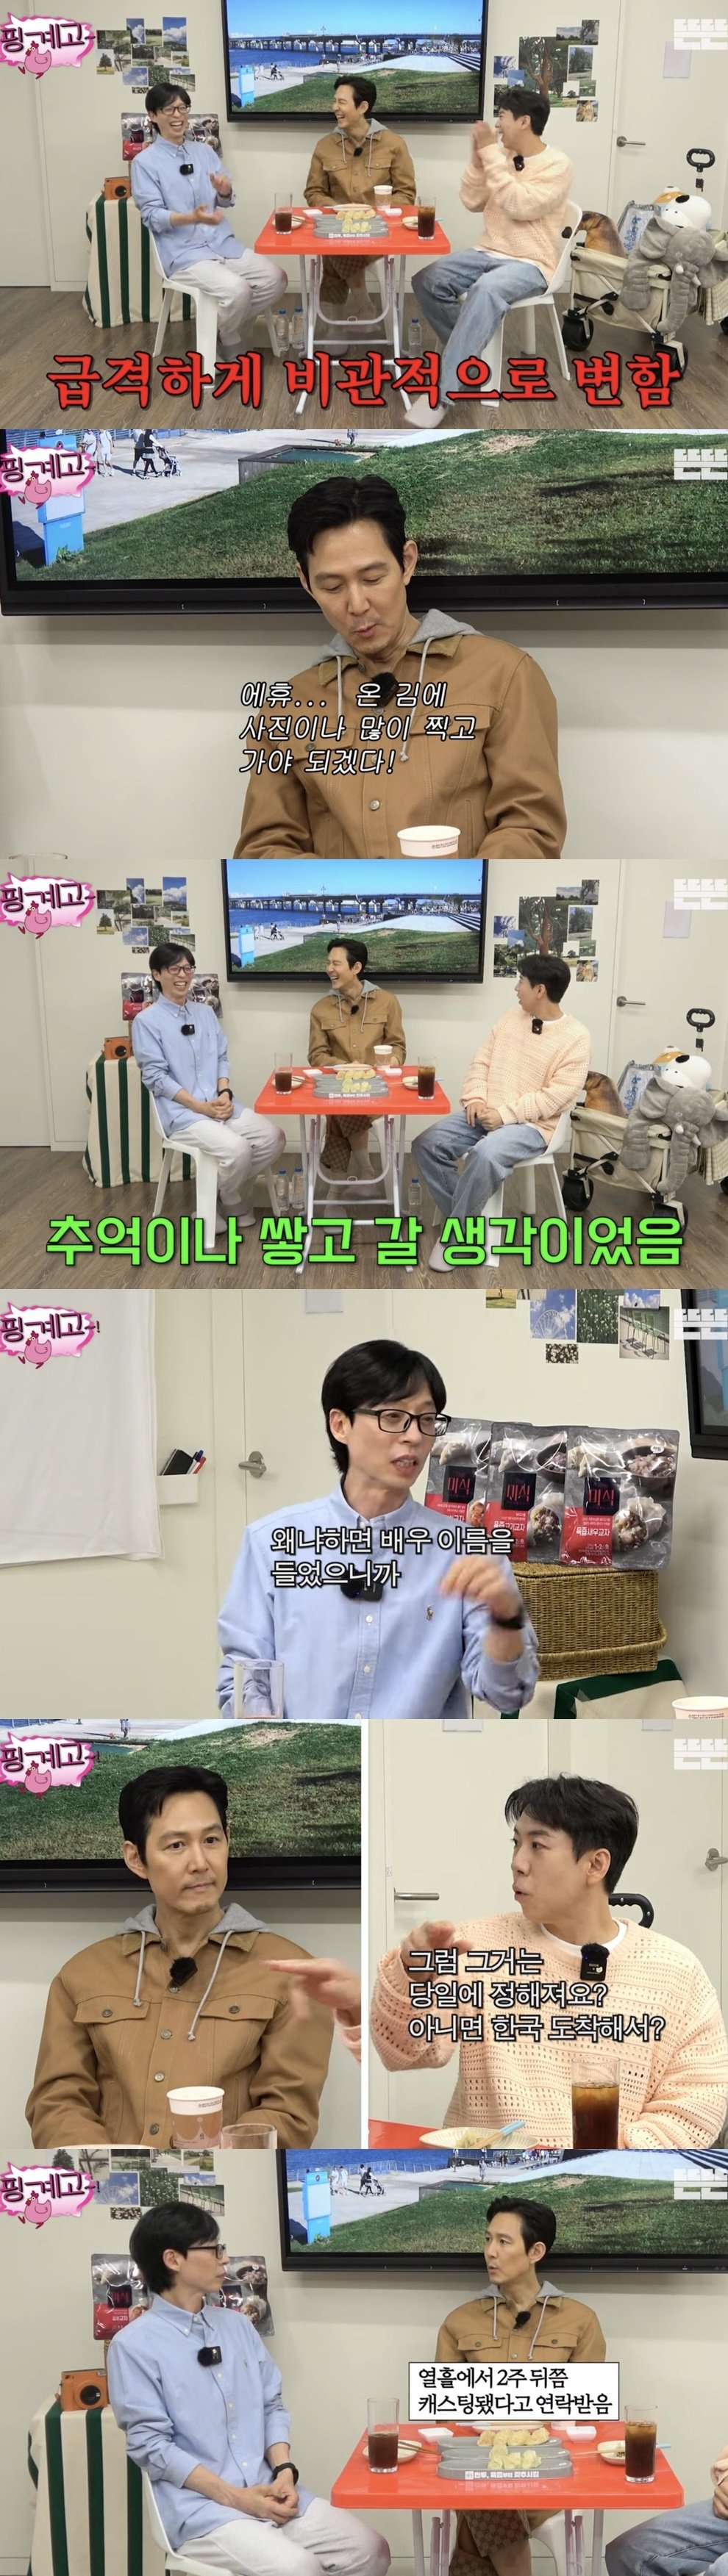 Lee Jeong-jae auditioned for the first time in a while because of Star Wars.